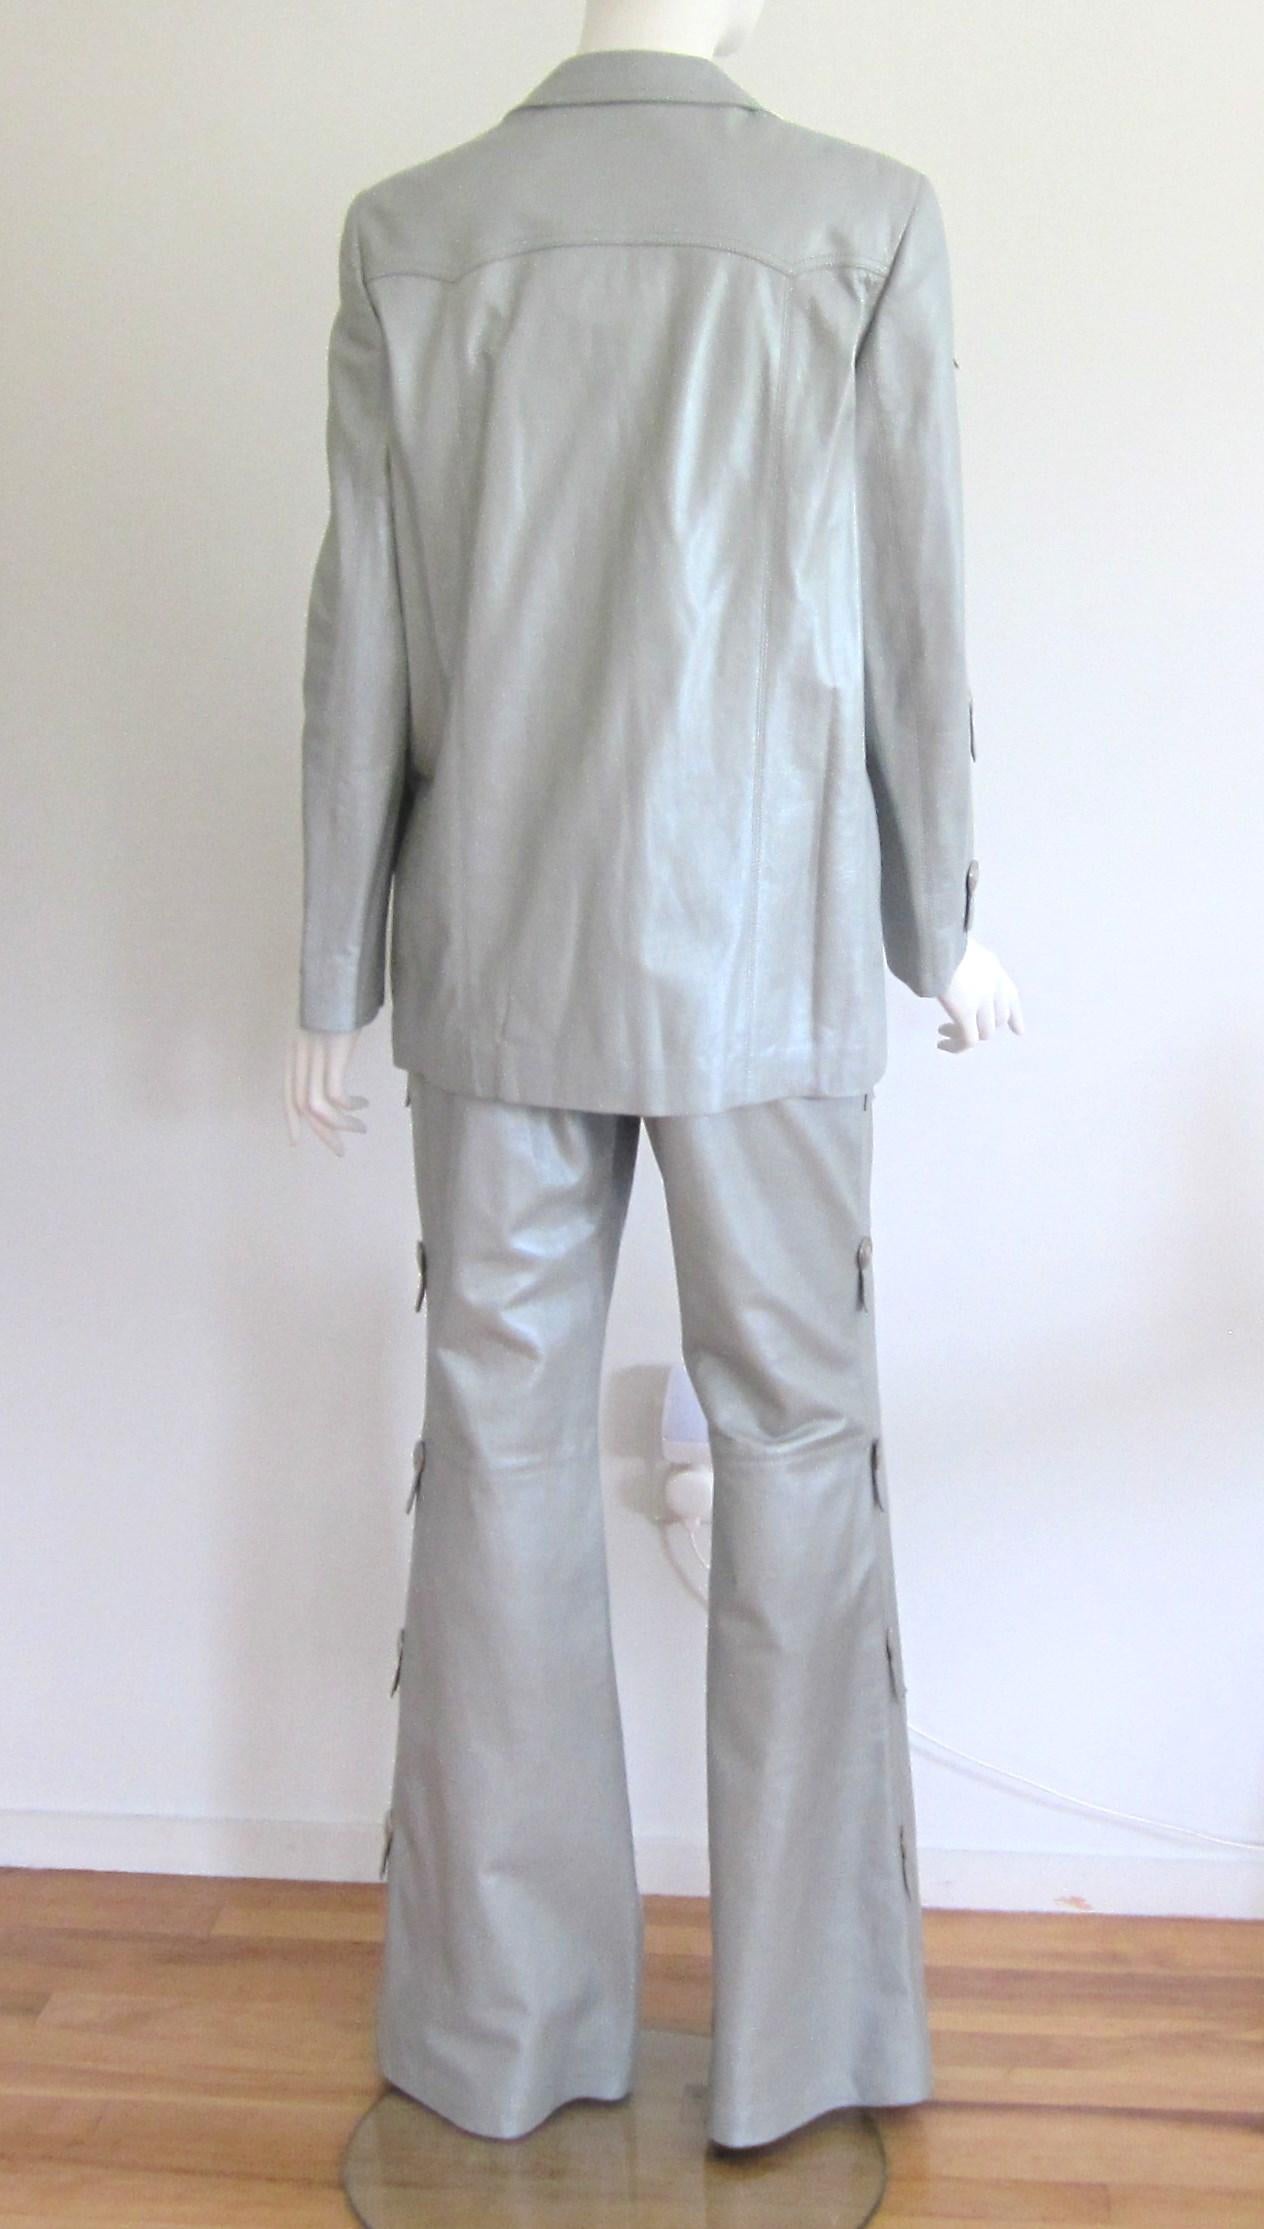  Escada Leather Jacket Pants - Western Motif Grey Suit New With Tags 1990s  In New Condition For Sale In Wallkill, NY